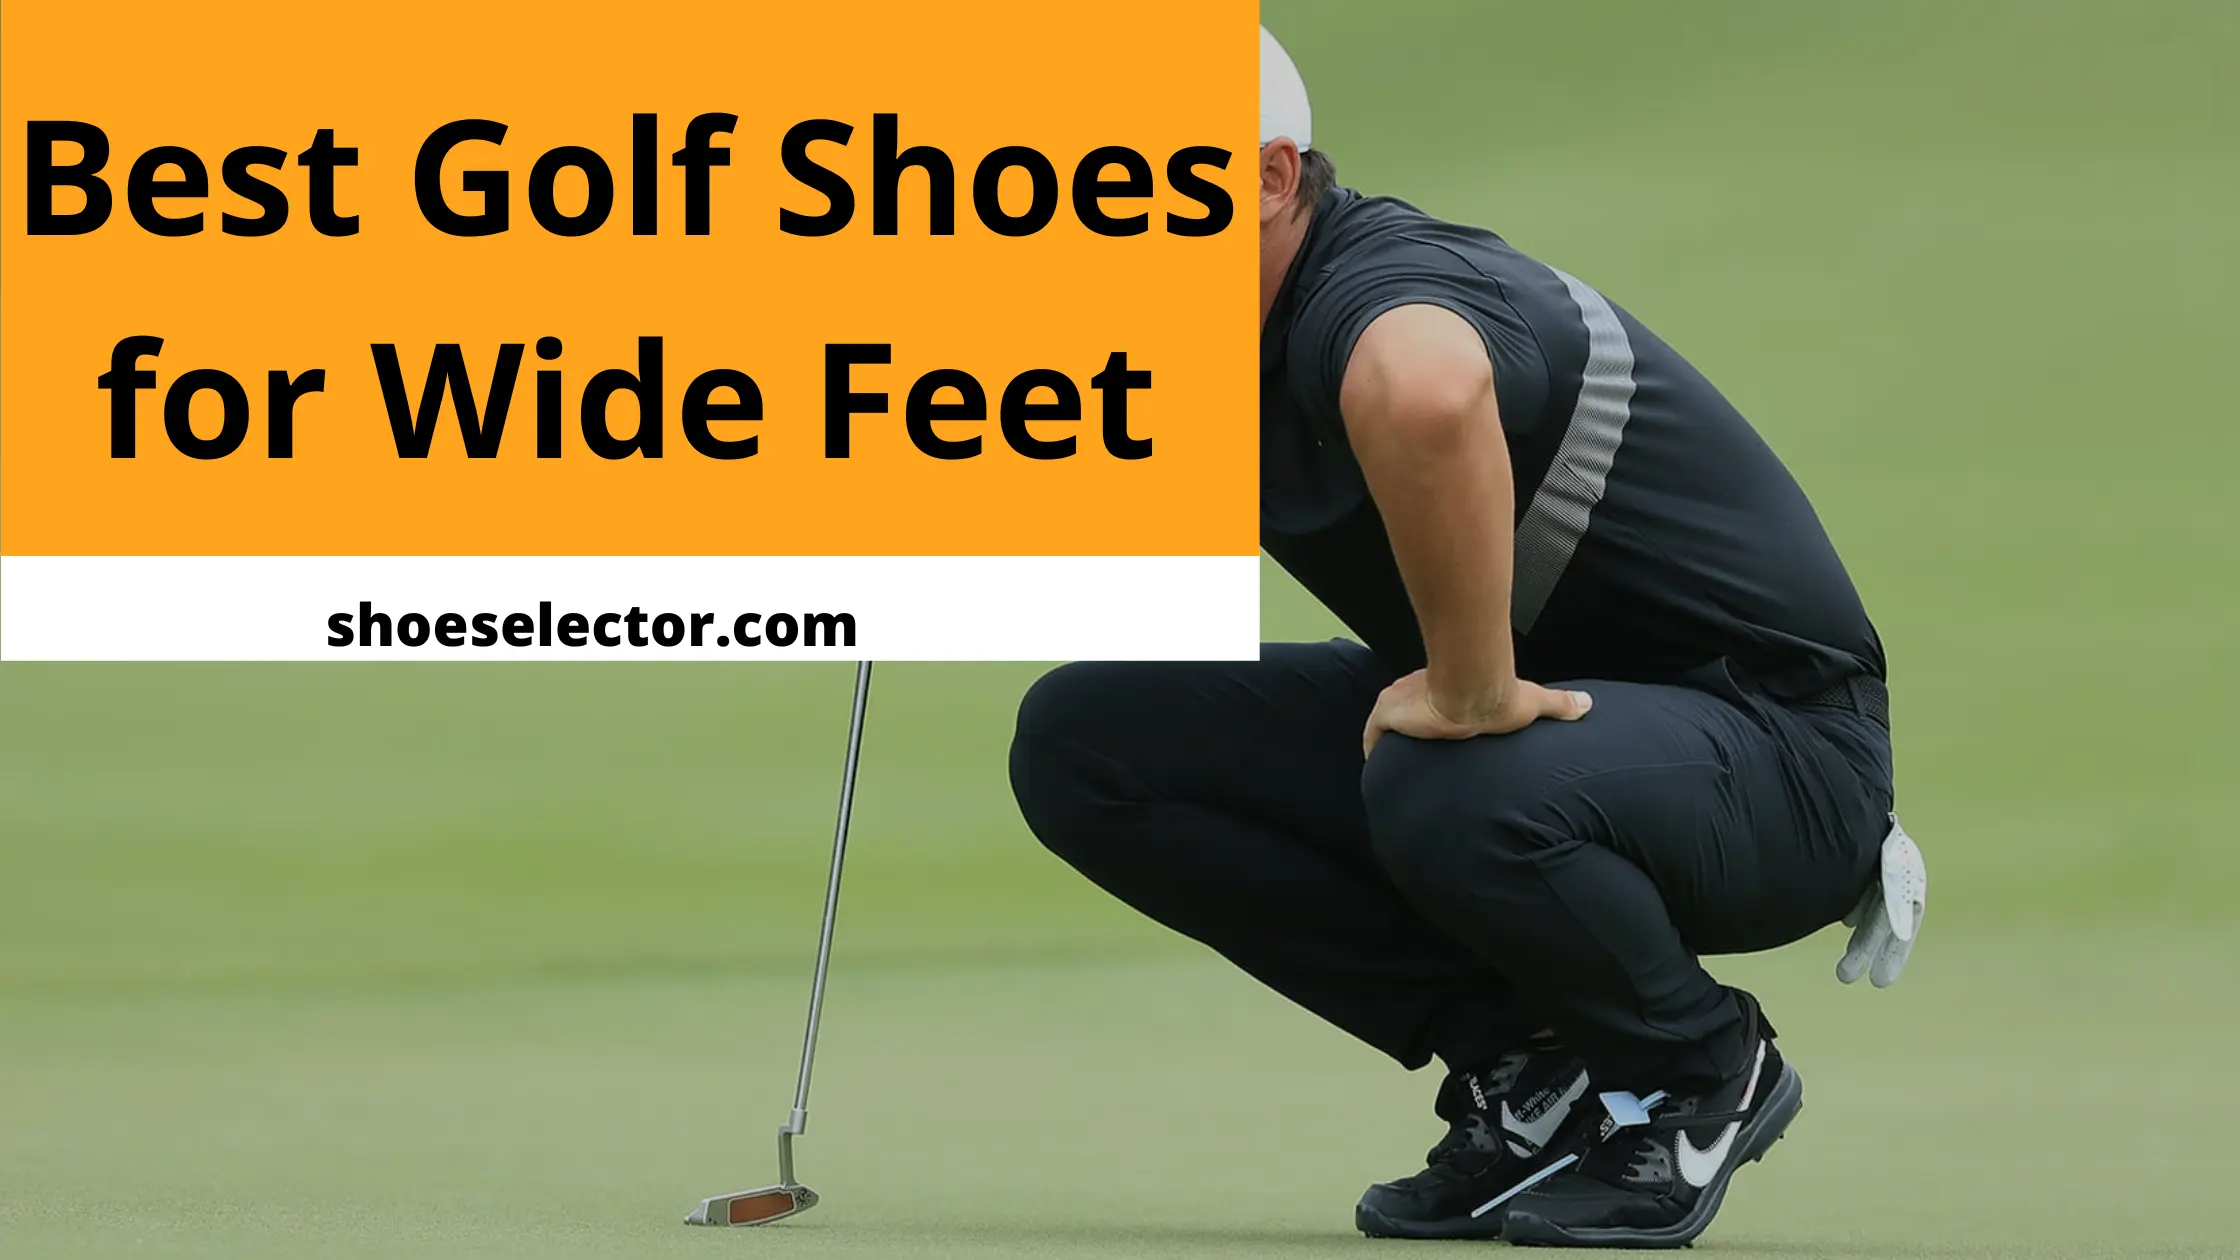 Best Golf Shoes For Wide Feet | Buying Guide